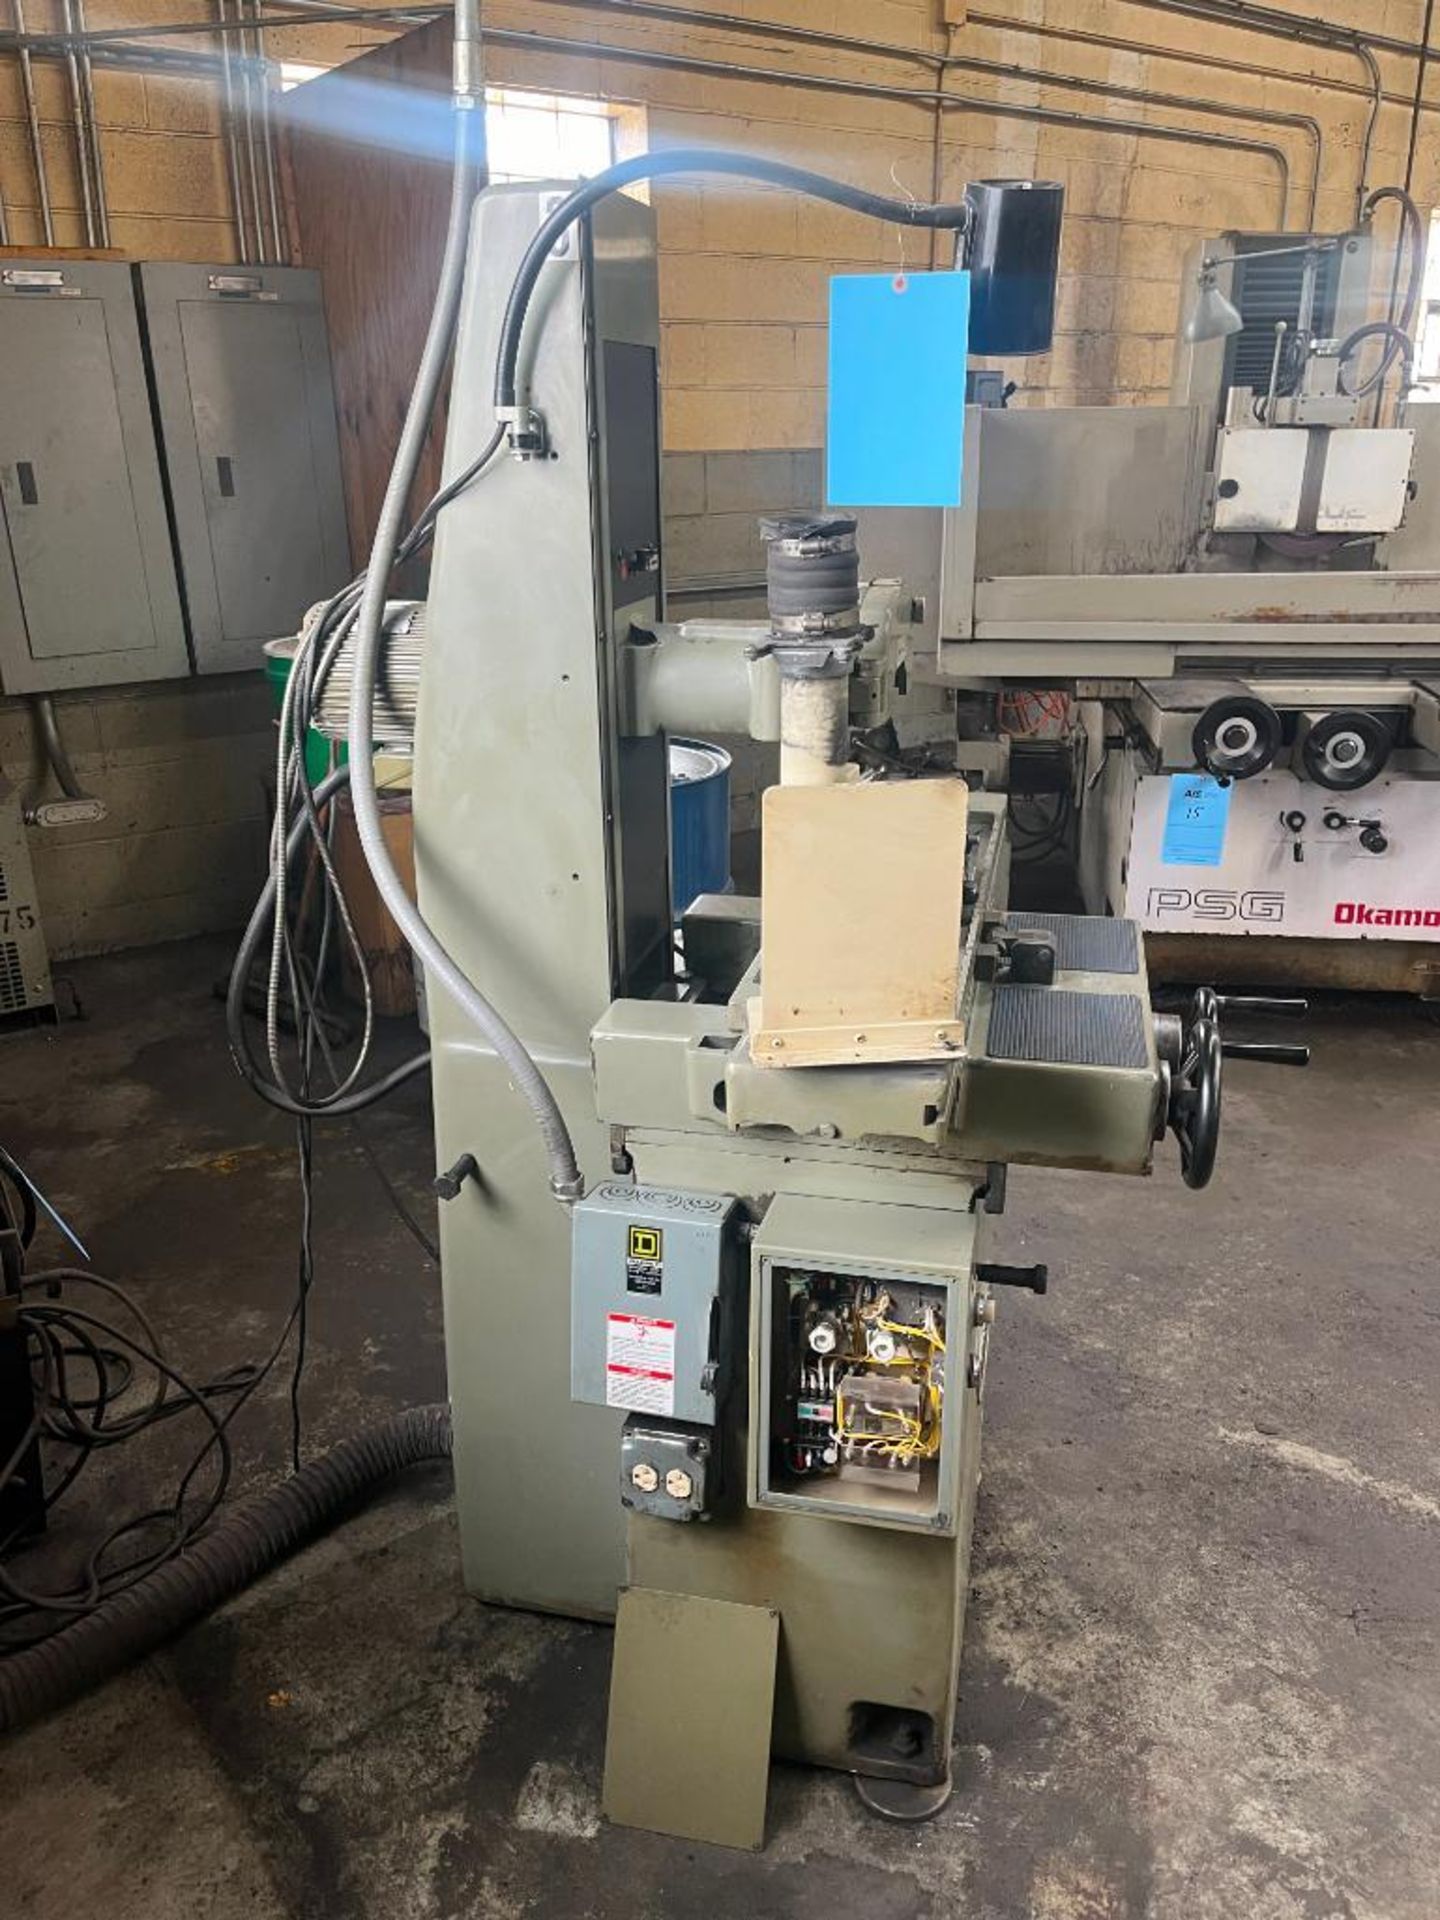 Mitsui 6" x 12" Hand Feed Surface Grinder Model 200MH, S/N 82023153 with DRO. With 6" x 12" Electrom - Image 4 of 10